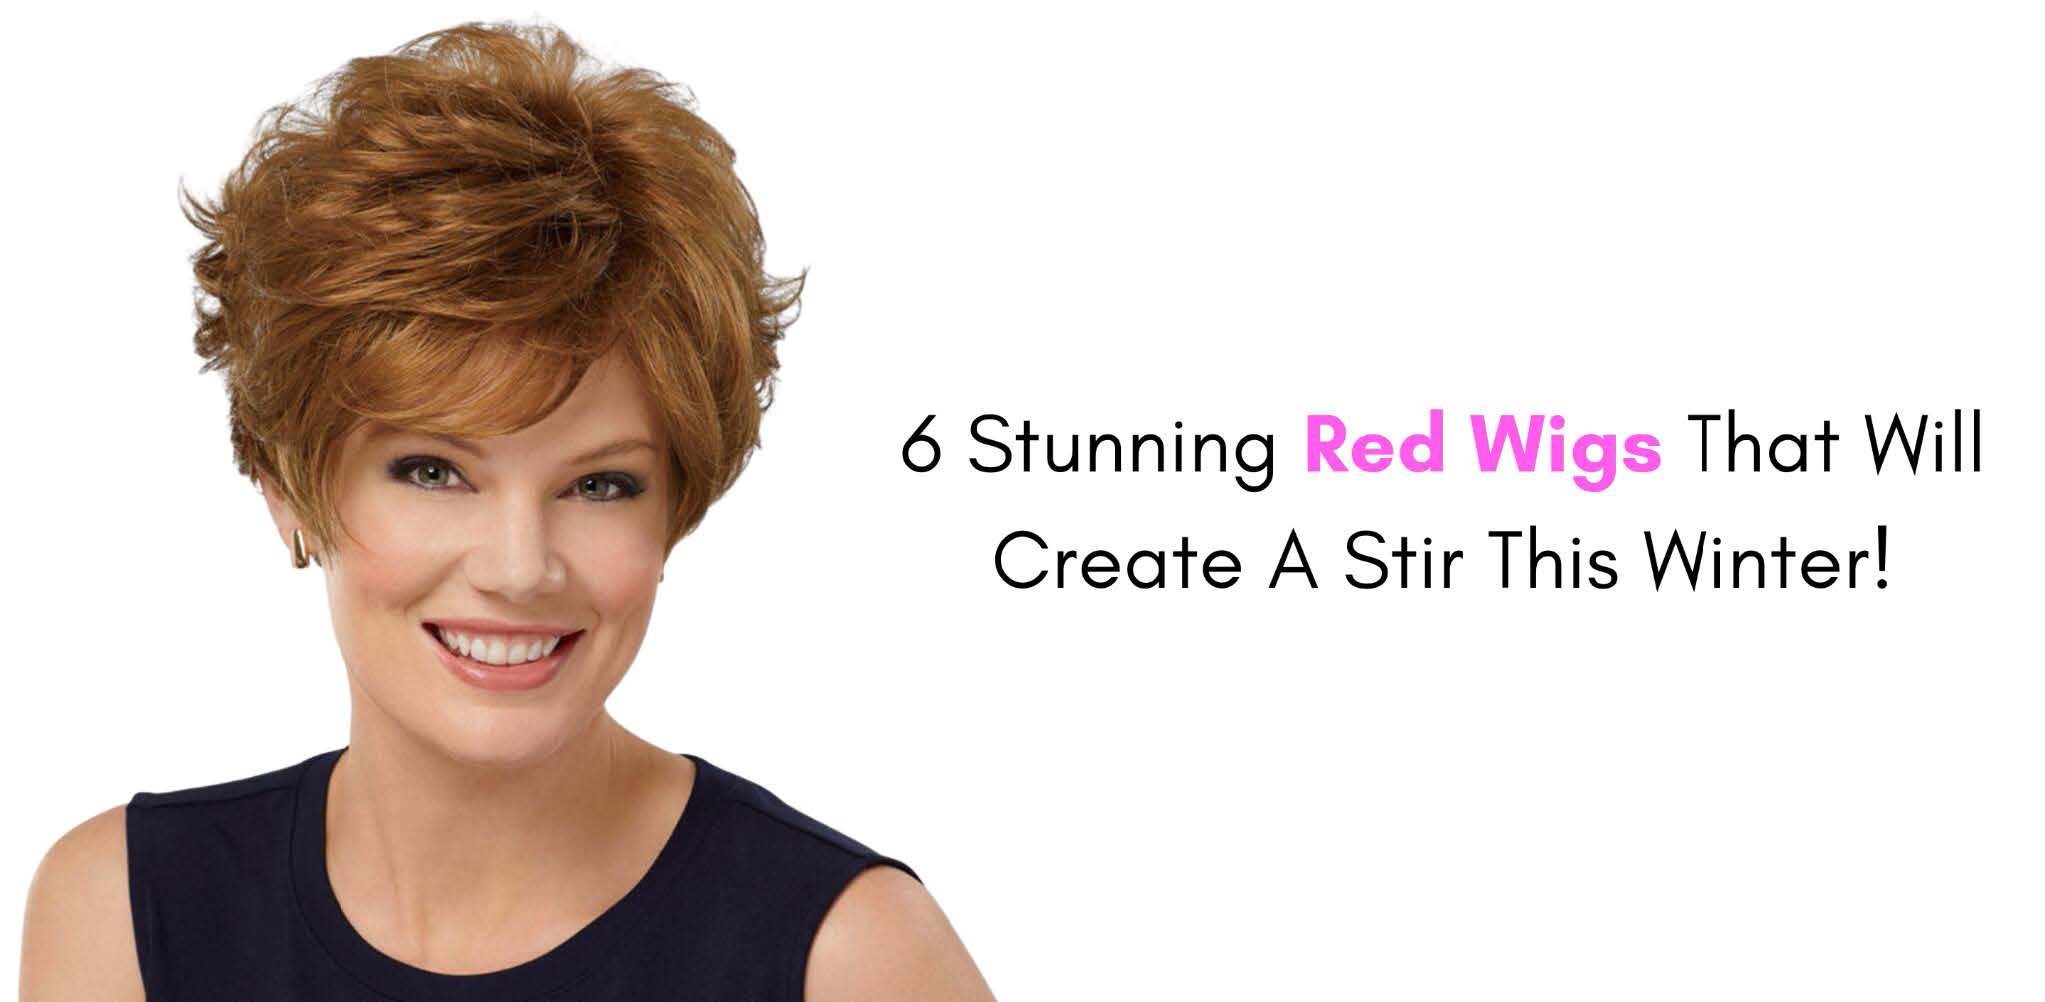 6 Stunning Red Wigs That Will Create A Stir This Winter!